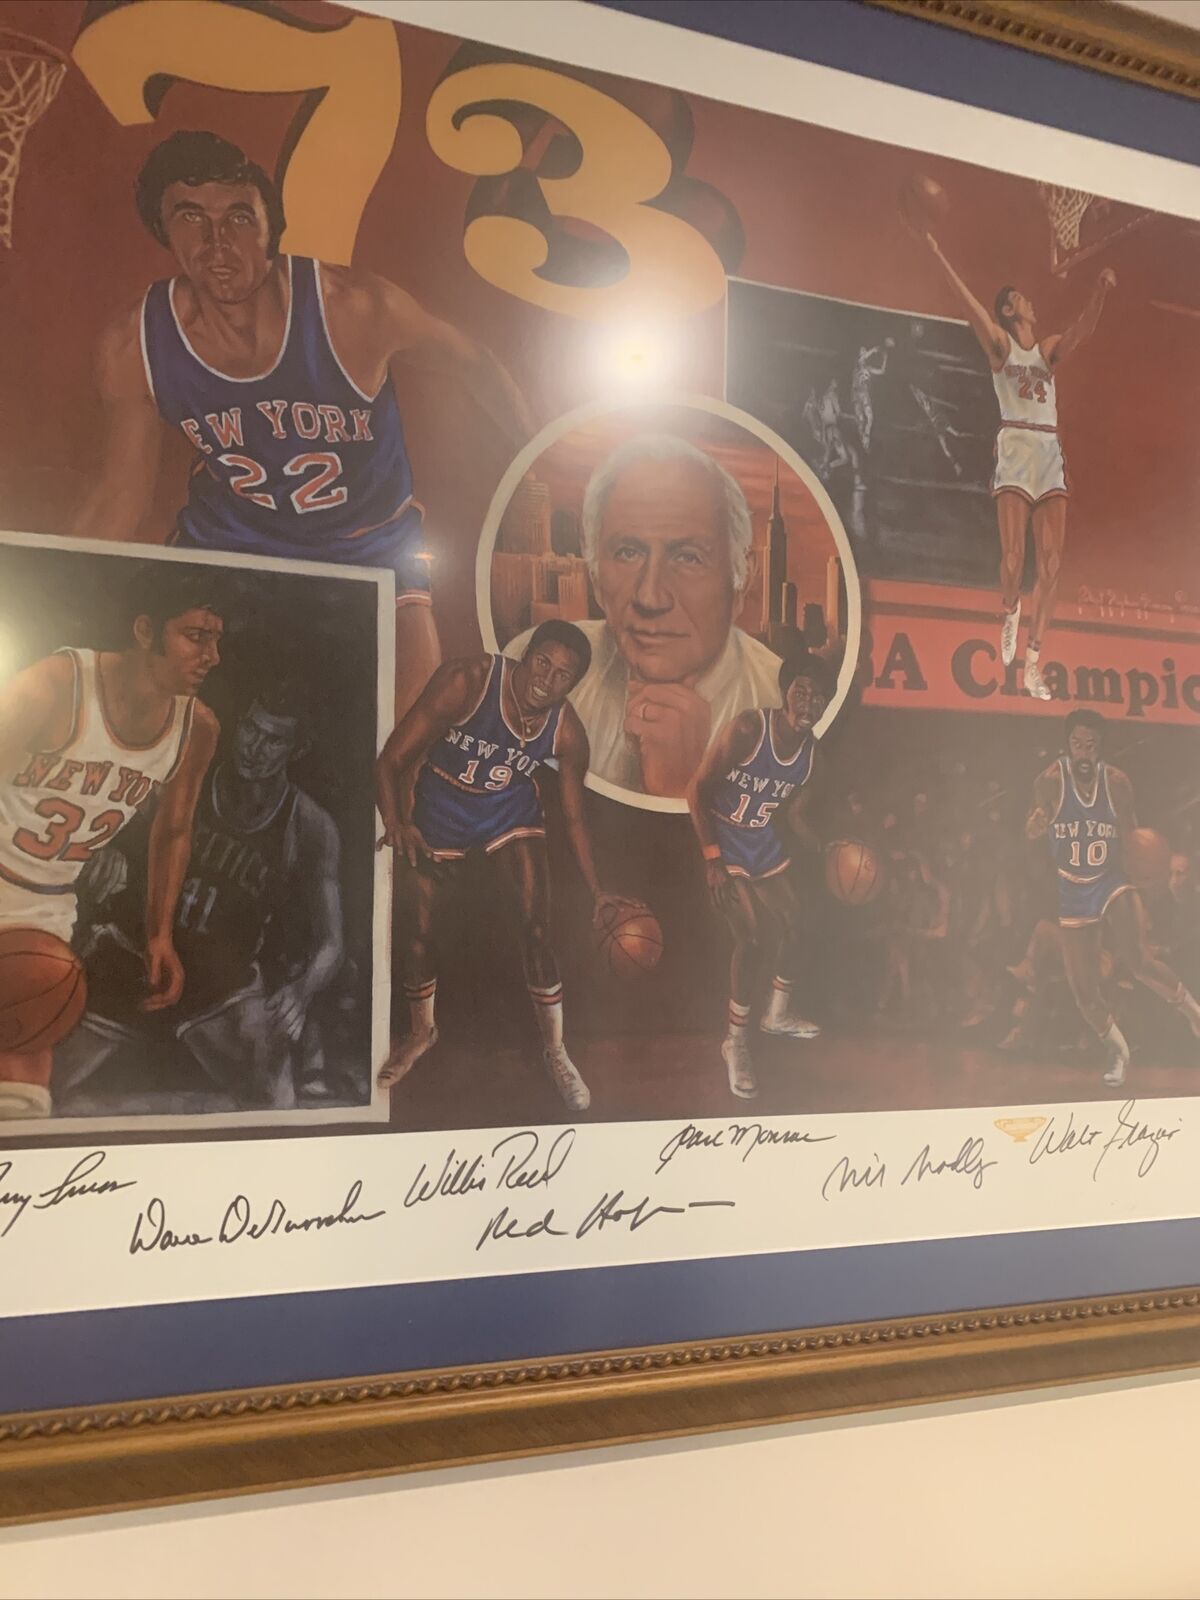 Rare 1973 New York Knicks Champs Autographed Lithograph #935/1973 Signed Team